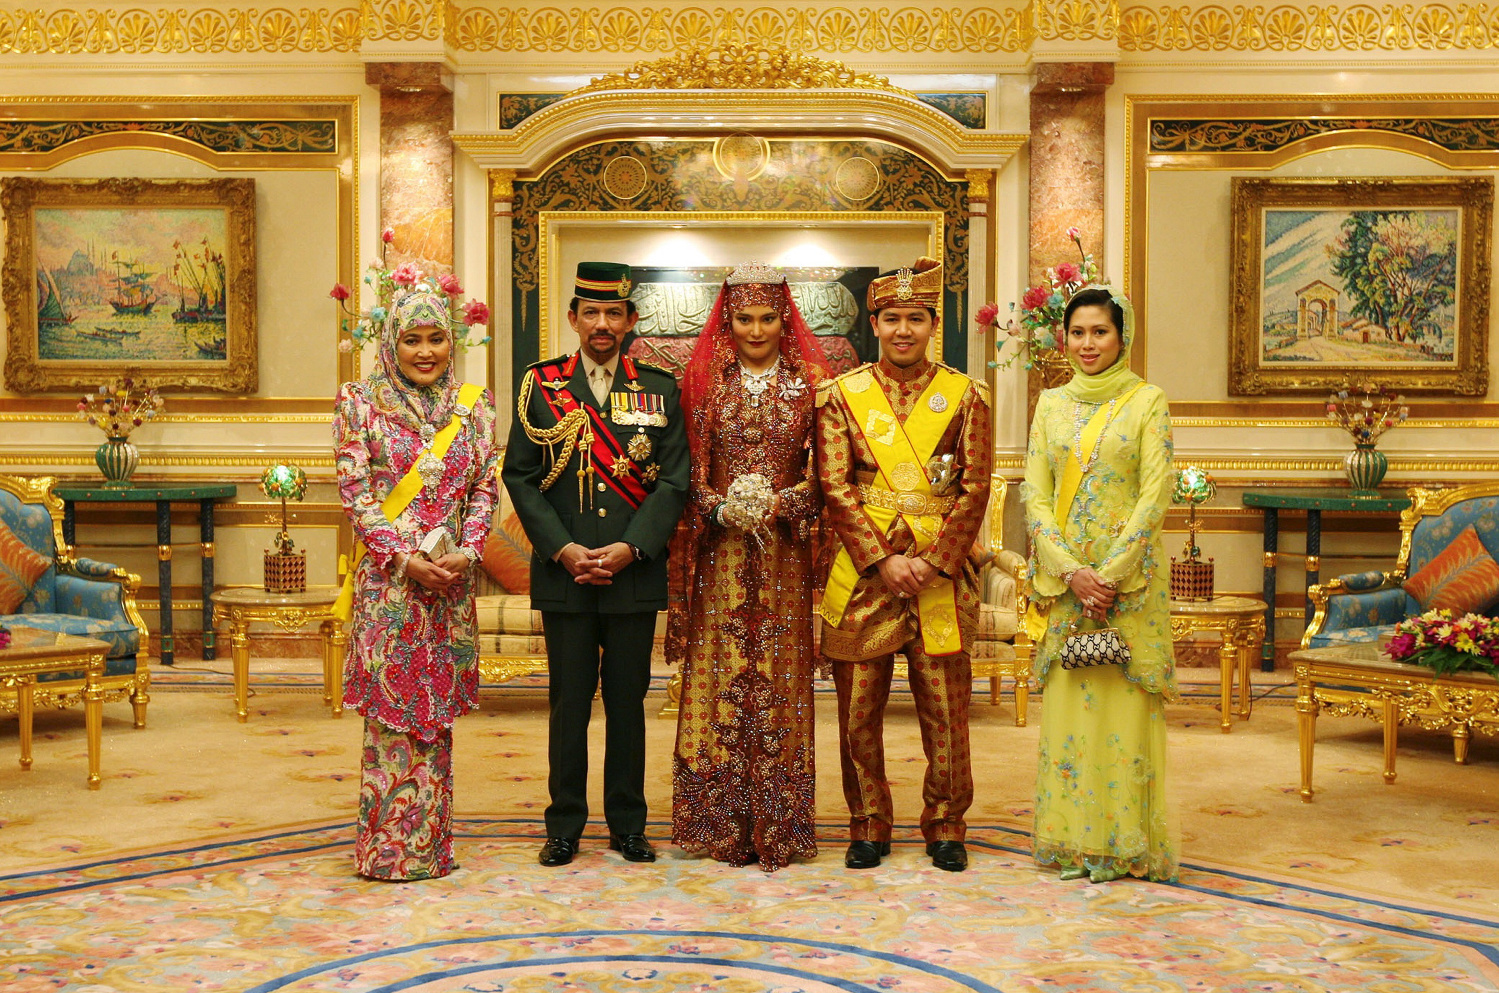 Sultan Hassanal Bolkiah is accompanied by Queen Consort Saleha (left) and third wife Azrinaz Mazhar (far right) at the wedding of his daughter Majeedah to Khairul Khalil (centre) © Pool Interagences / Getty Images